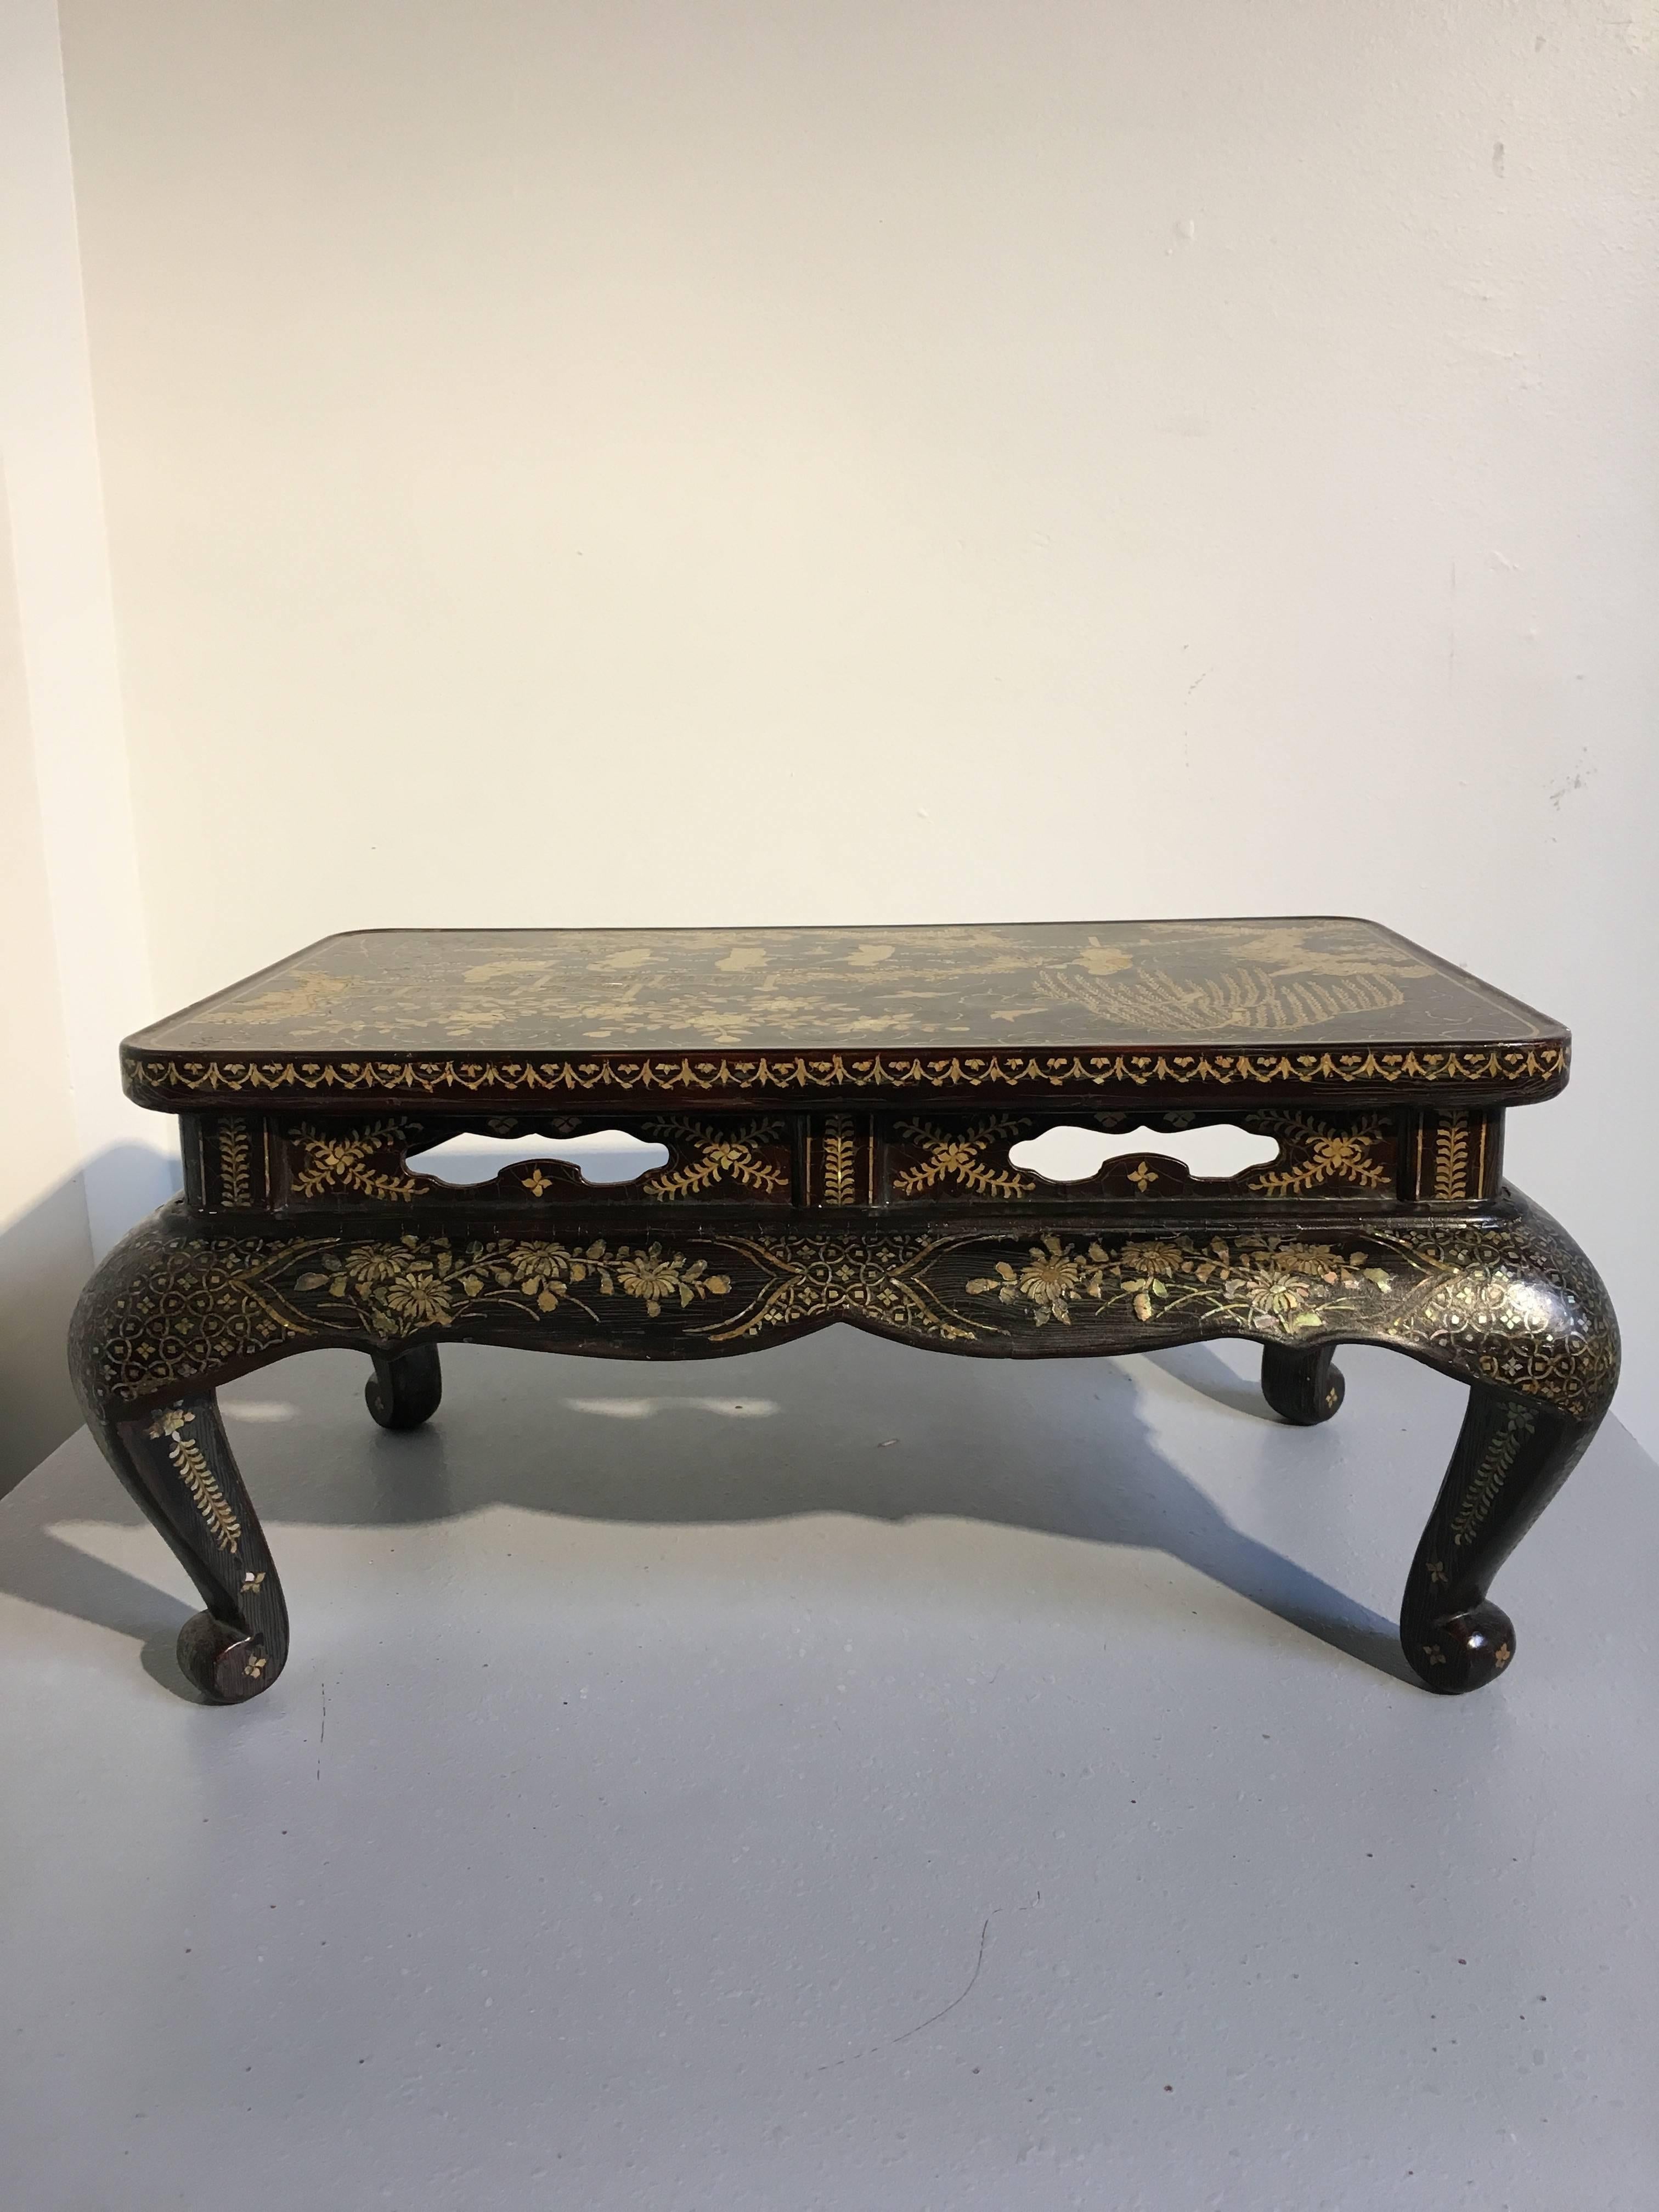 Qing Dynasty Chinese Lacquer and Mother-of-Pearl Small Table, 18th-19th Century 1